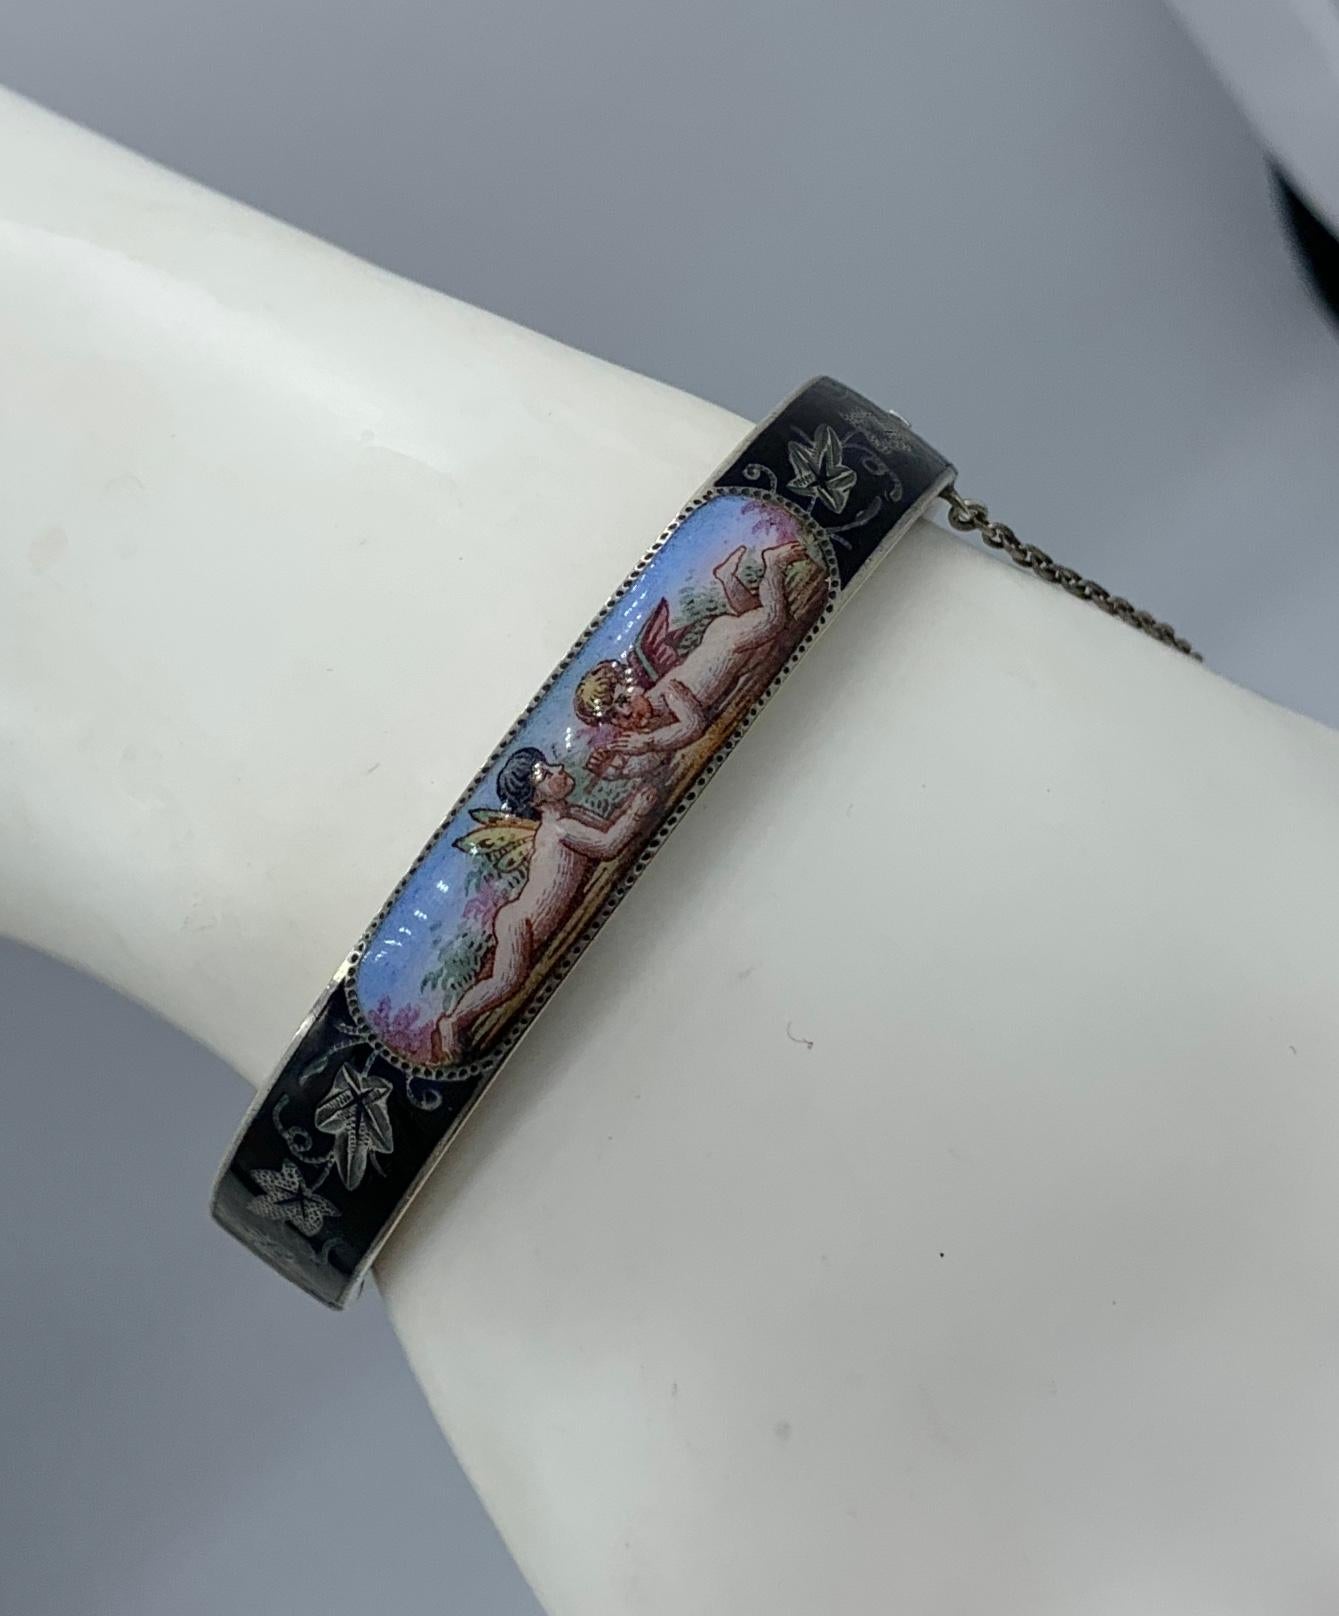 This is very rare and wonderful Victorian Enamel Bangle Bracelet with an image of two Winged Cherub or Angels lying on a grassy meadow with greenery behind with a beautiful blue sky.   The romantic and charming image is done in enamel with gorgeous